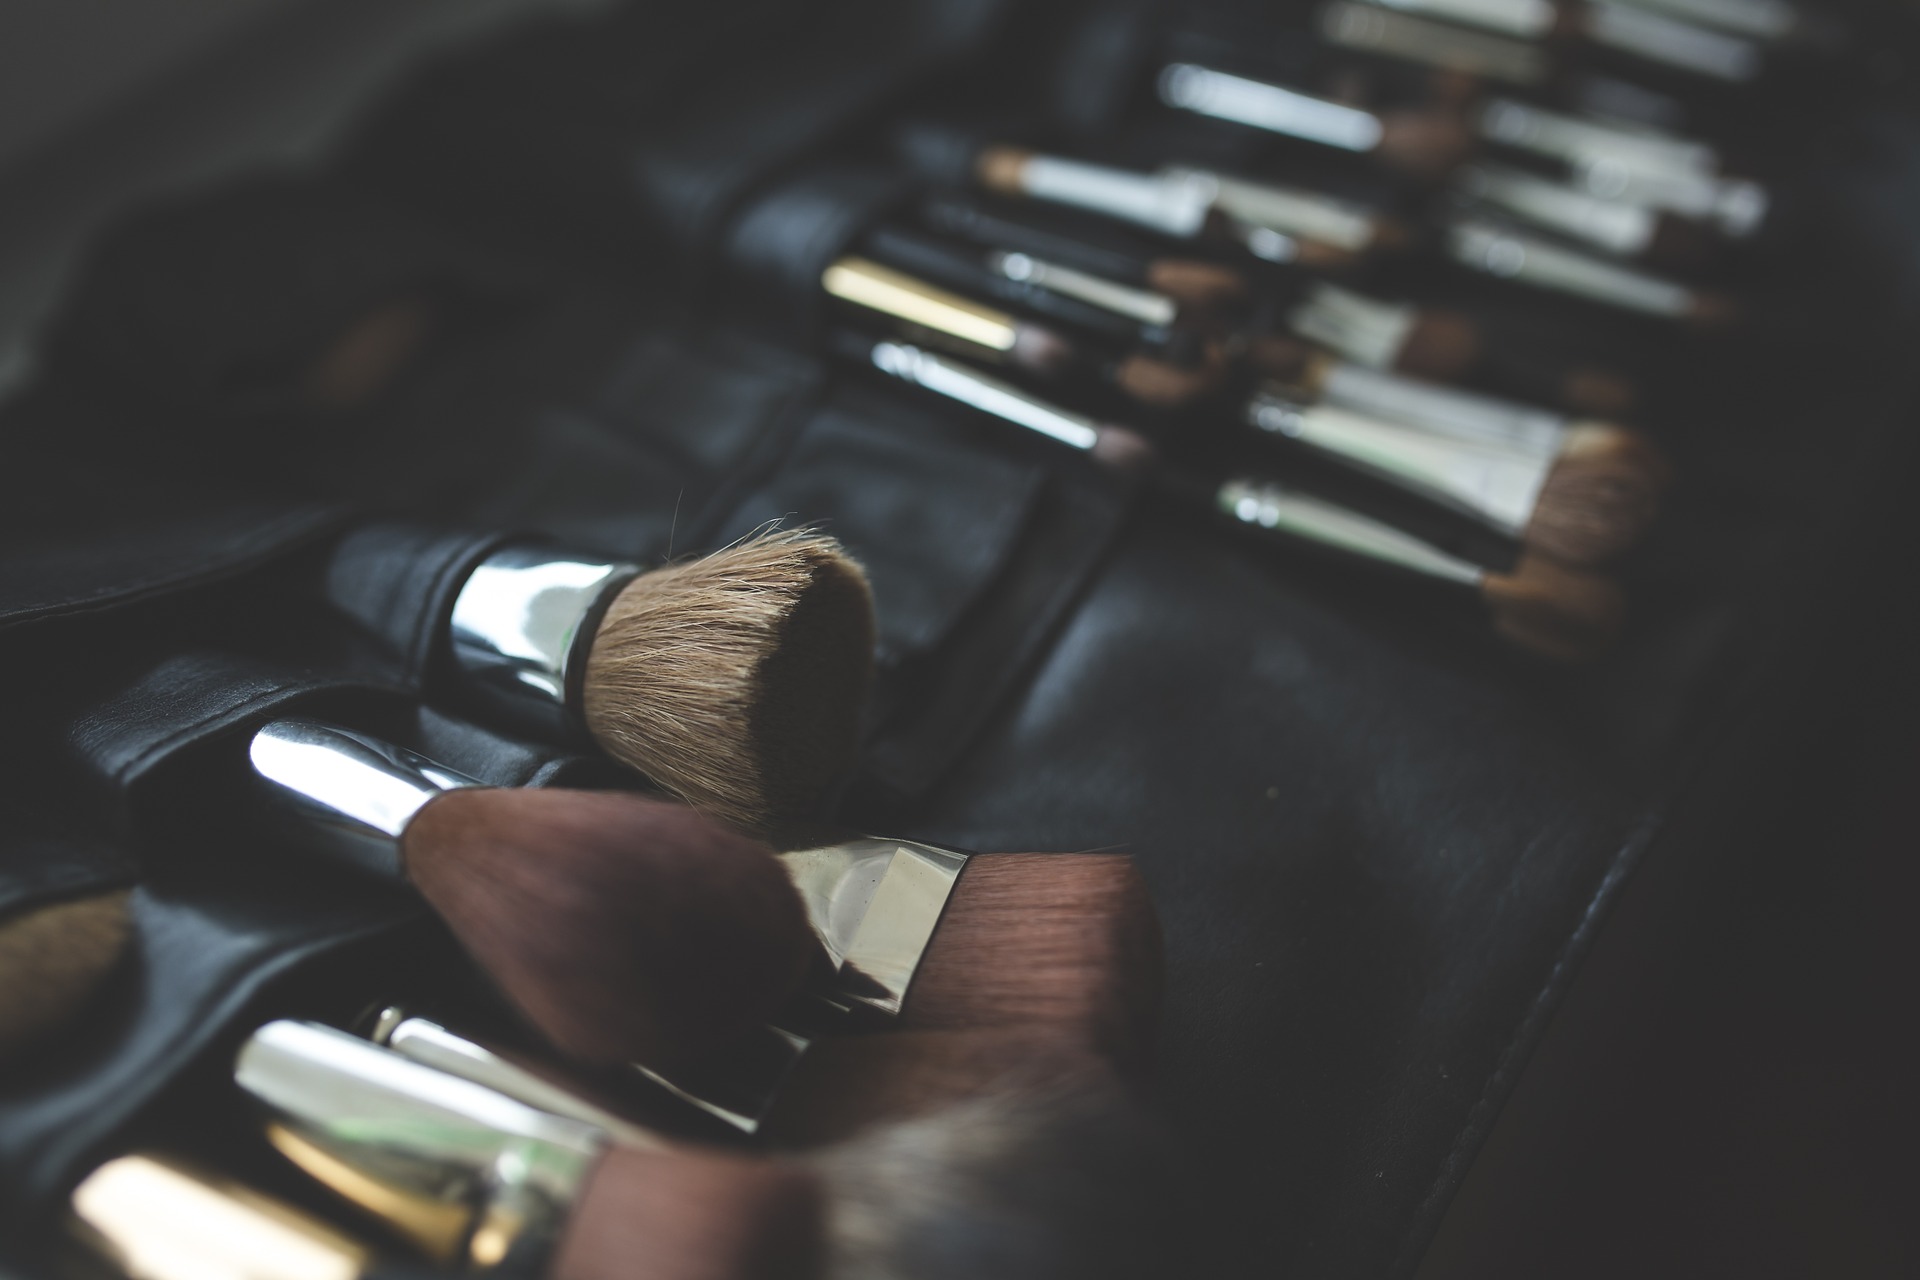 How To Clean Makeup Brushes At Home In 6 Quick Steps